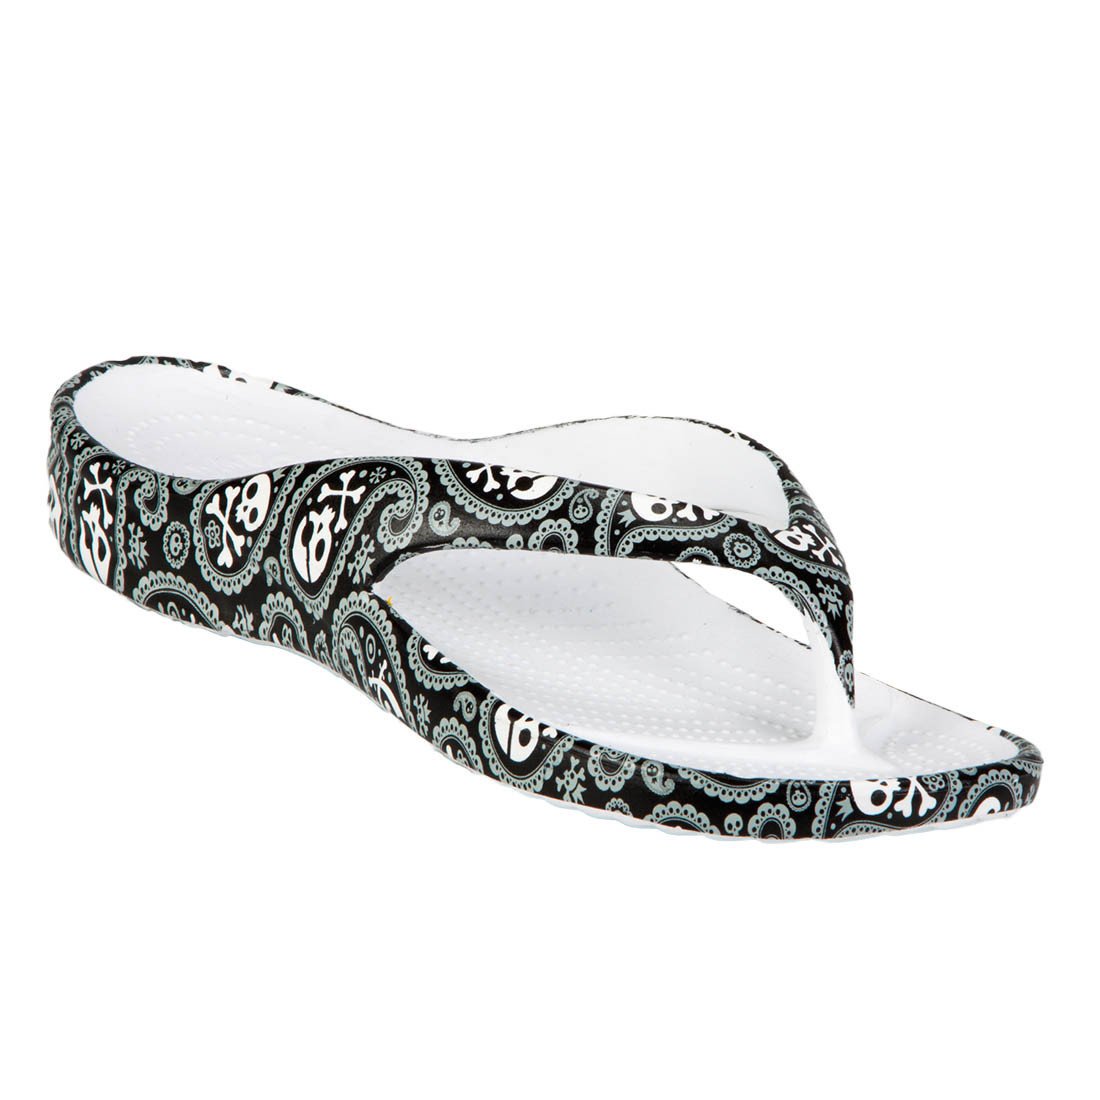 Women's Loudmouth Flip Flops - Shiver Me Timbers